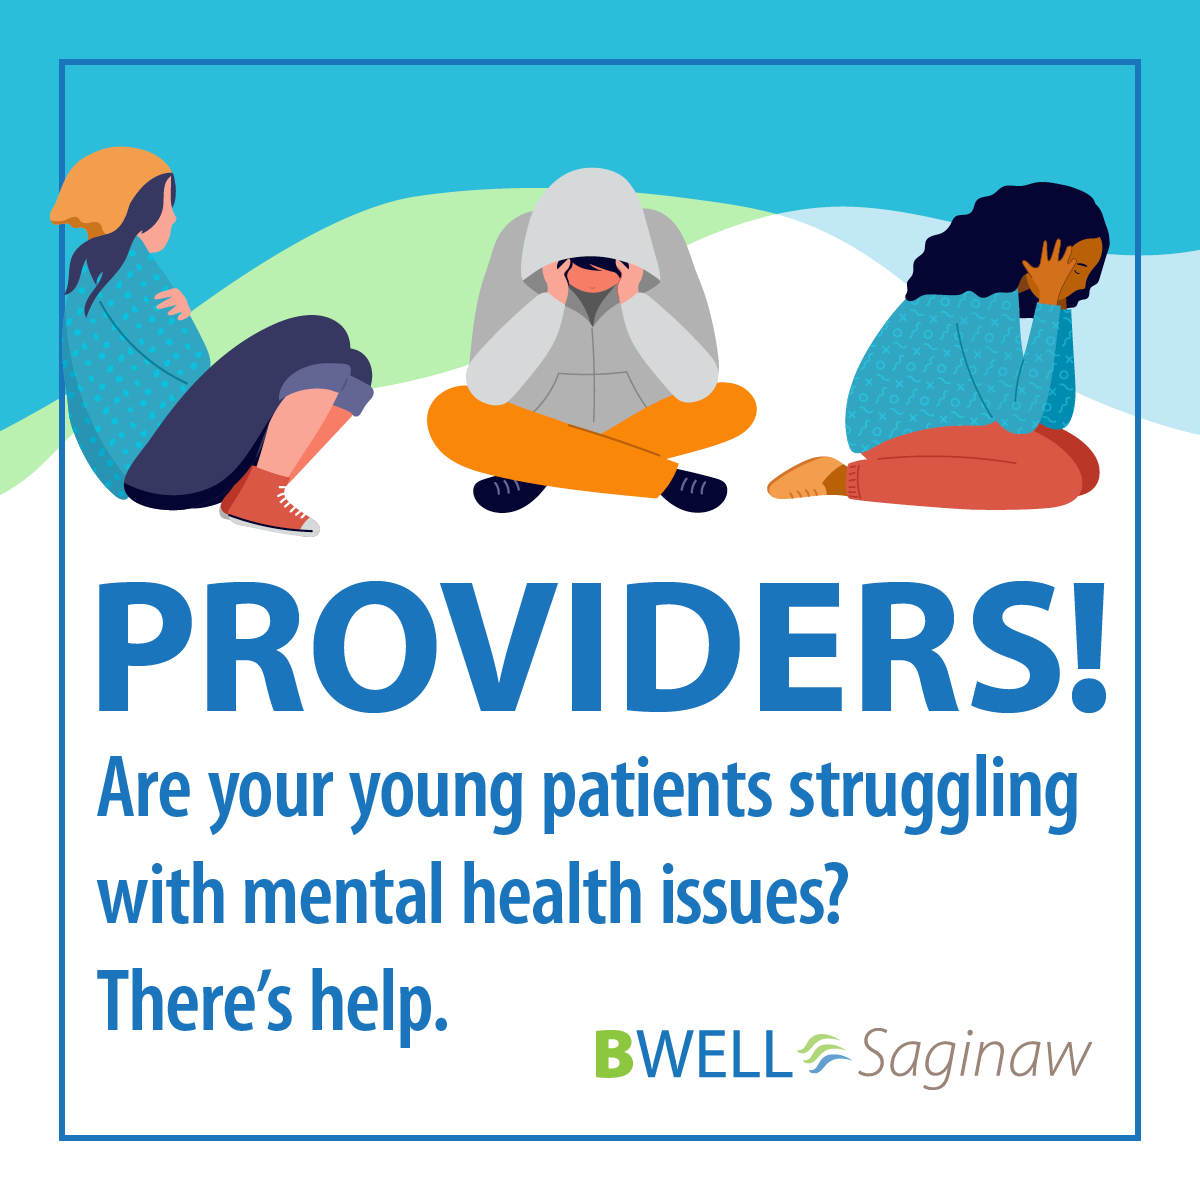 #1: Providers: Are your young patients struggling with mental health issues?